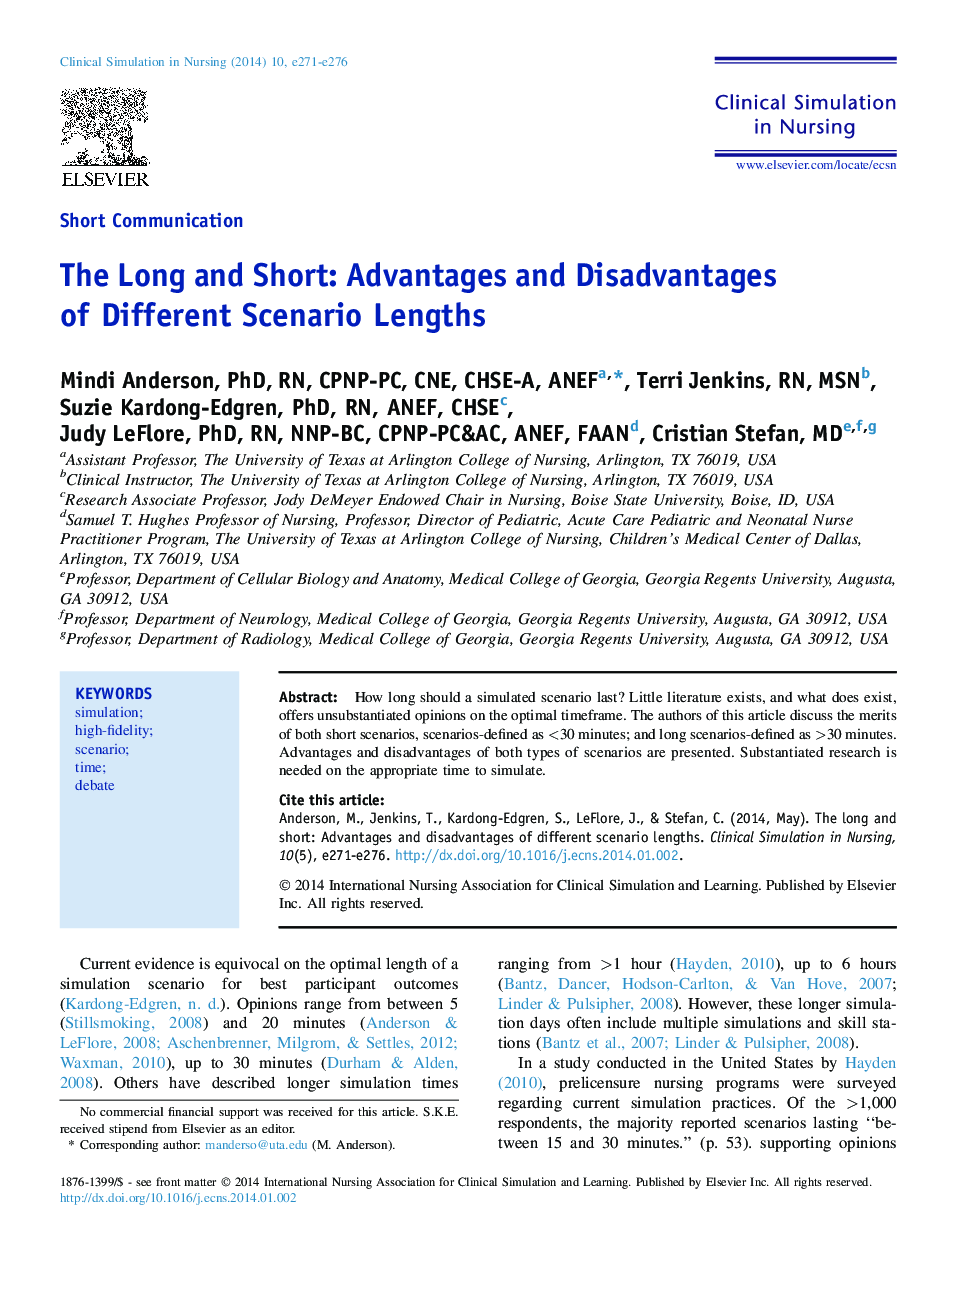 The Long and Short: Advantages and Disadvantages of Different Scenario Lengths